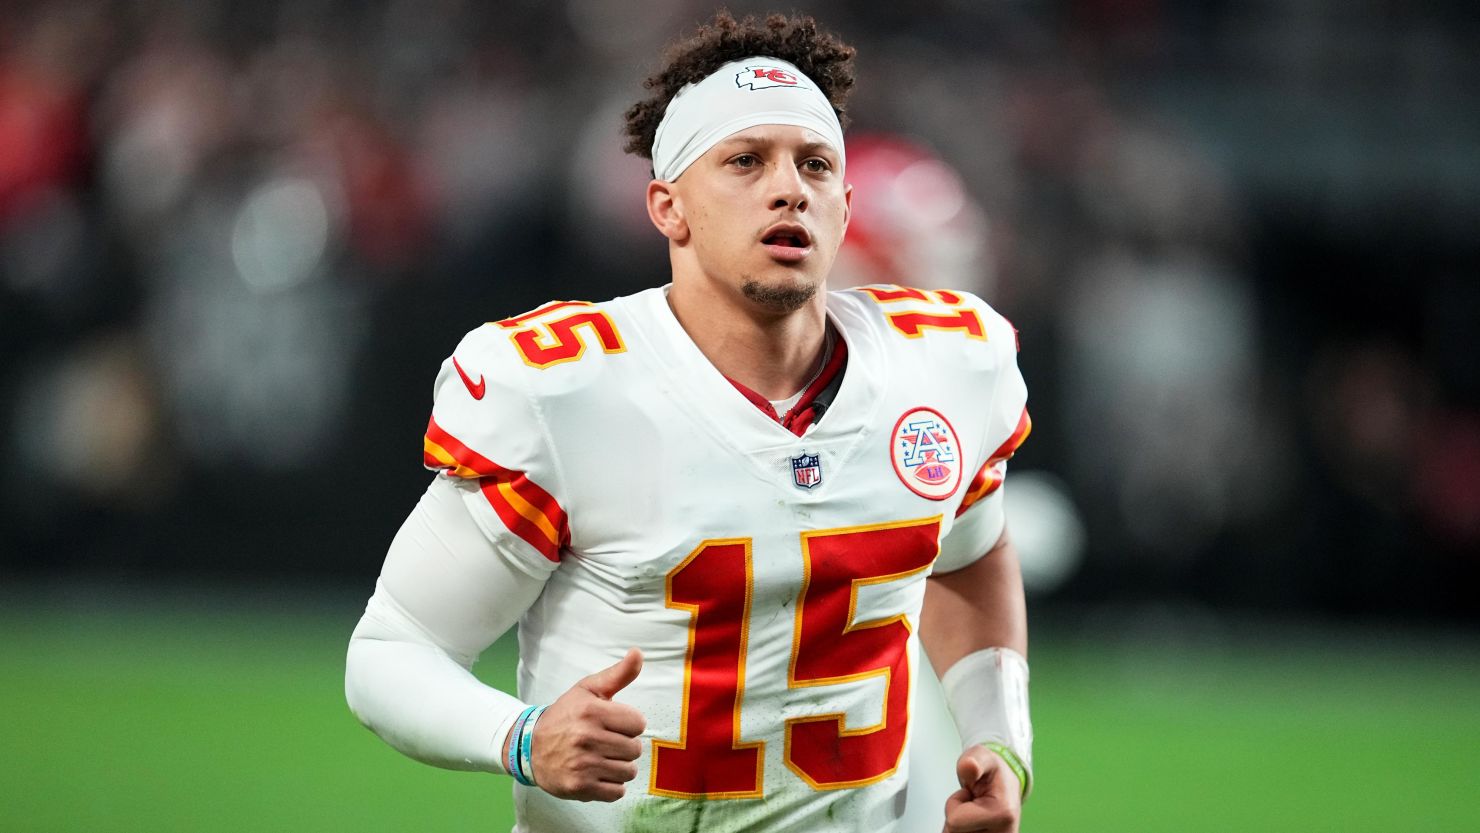  Patrick Mahomes Shares Insights on Taylor Swift's Football Acumen and Impact on Chiefs